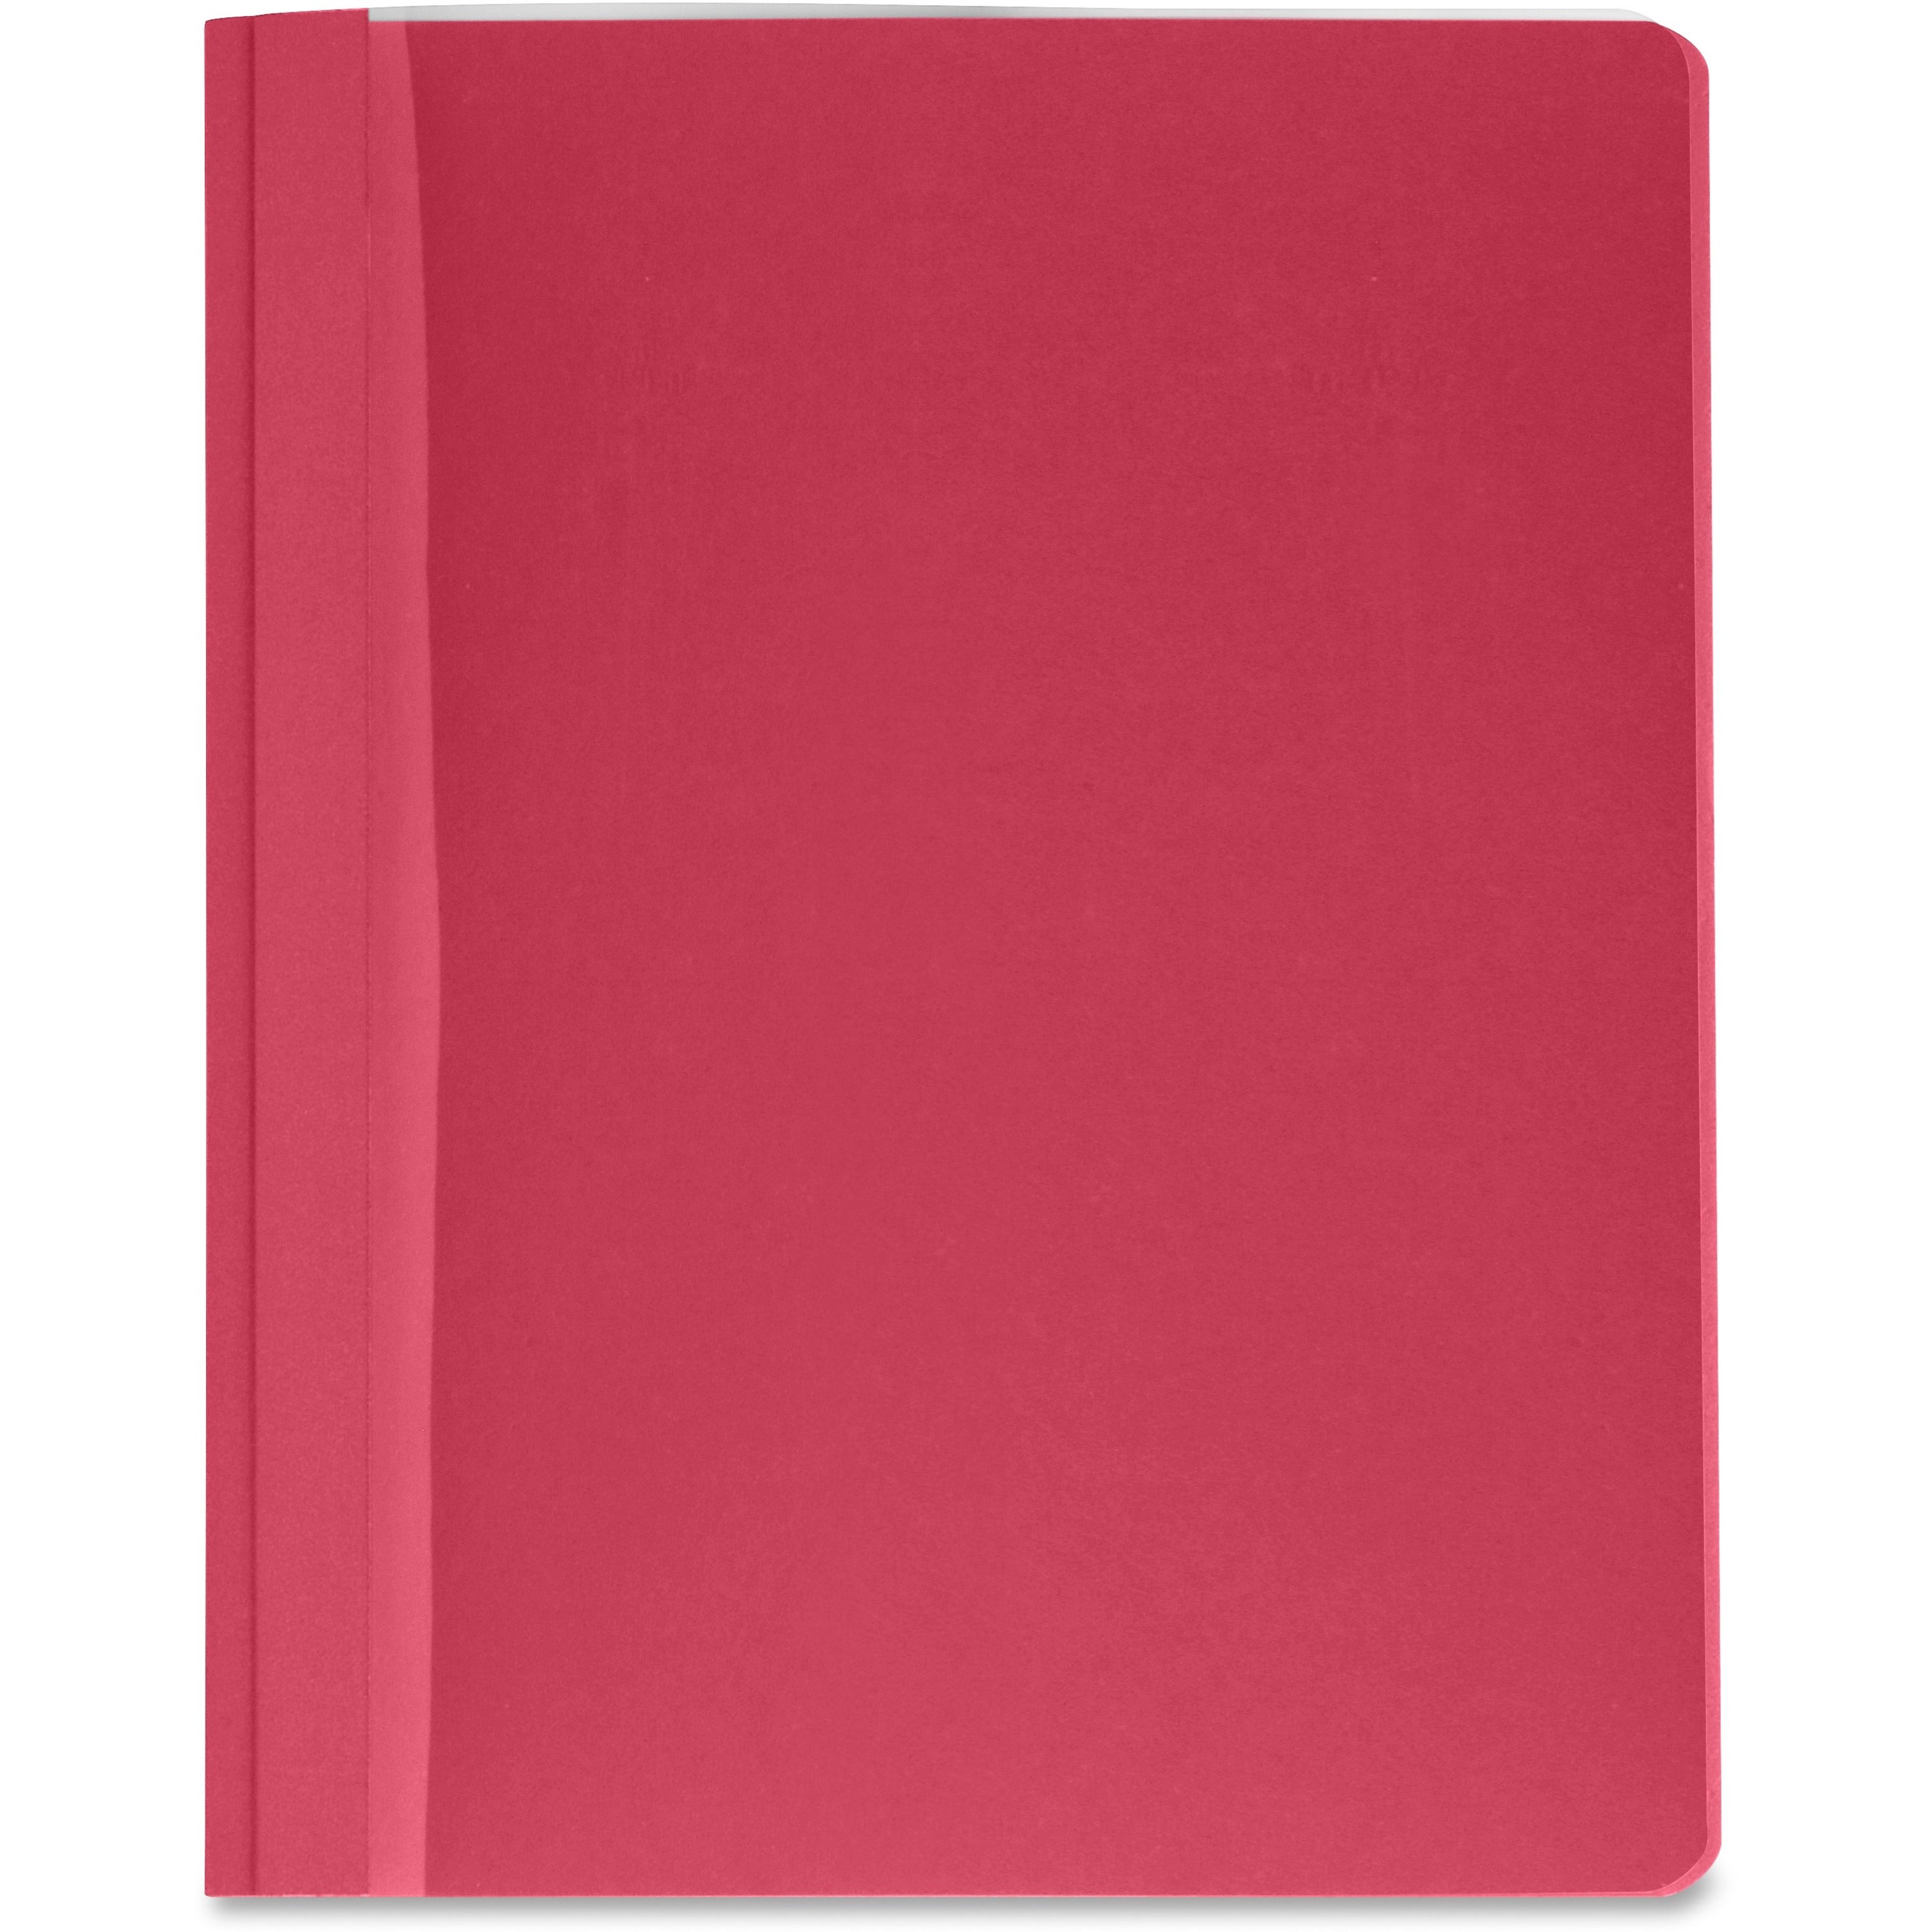 Business Source Letter Report Cover - 8 1/2" x 11" - 100 Sheet Capacity - 3 x Prong Fastener(s) - Red - 25 / Box - 